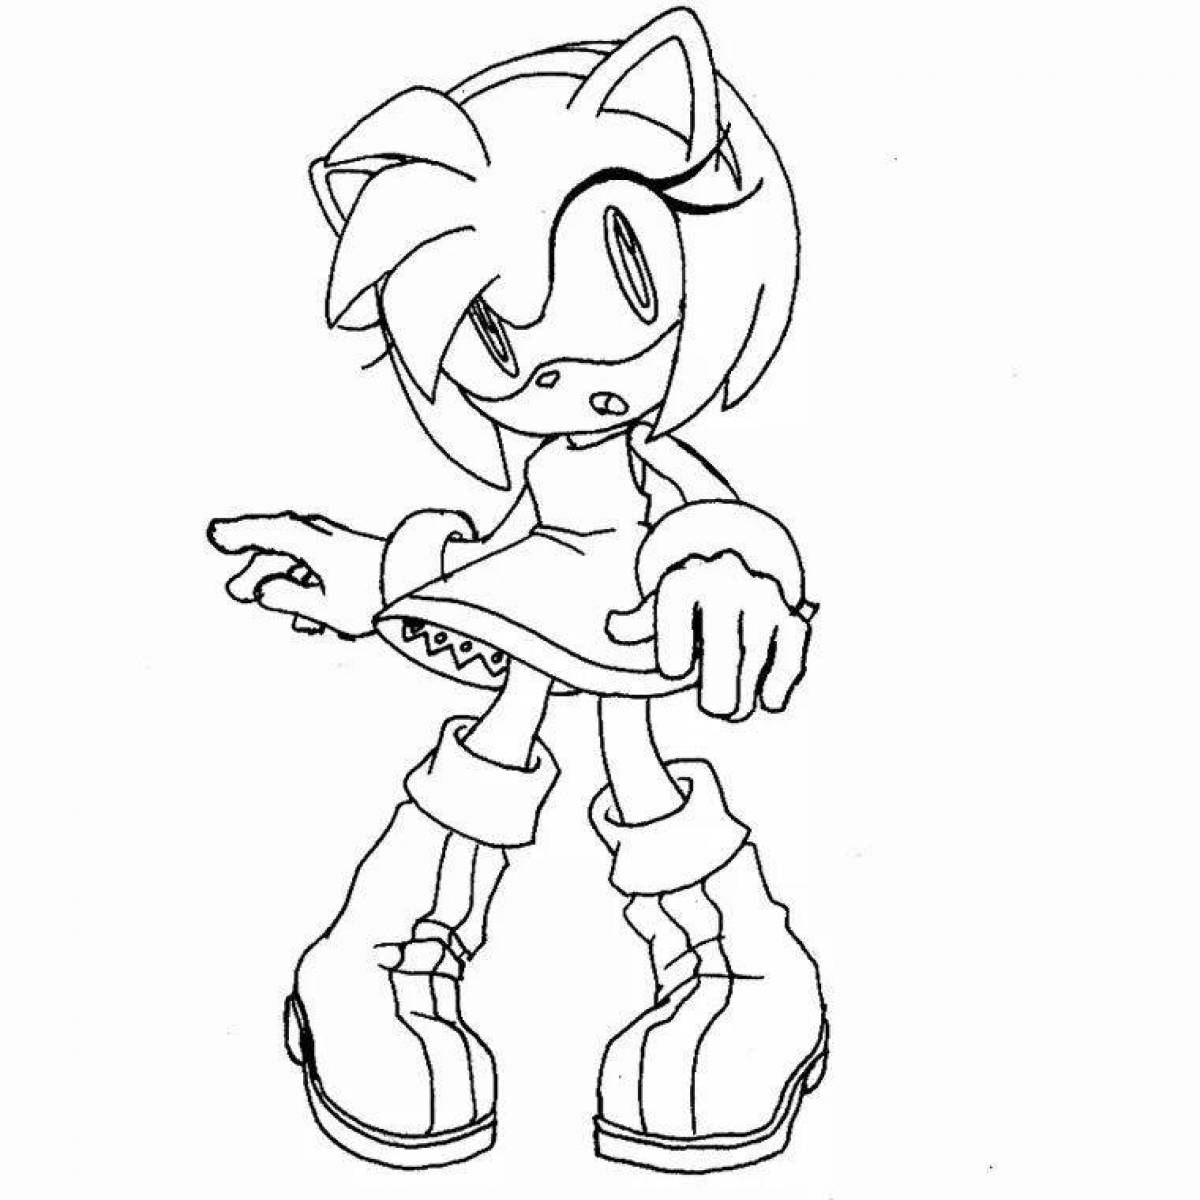 Sonic and amy rose holiday coloring book